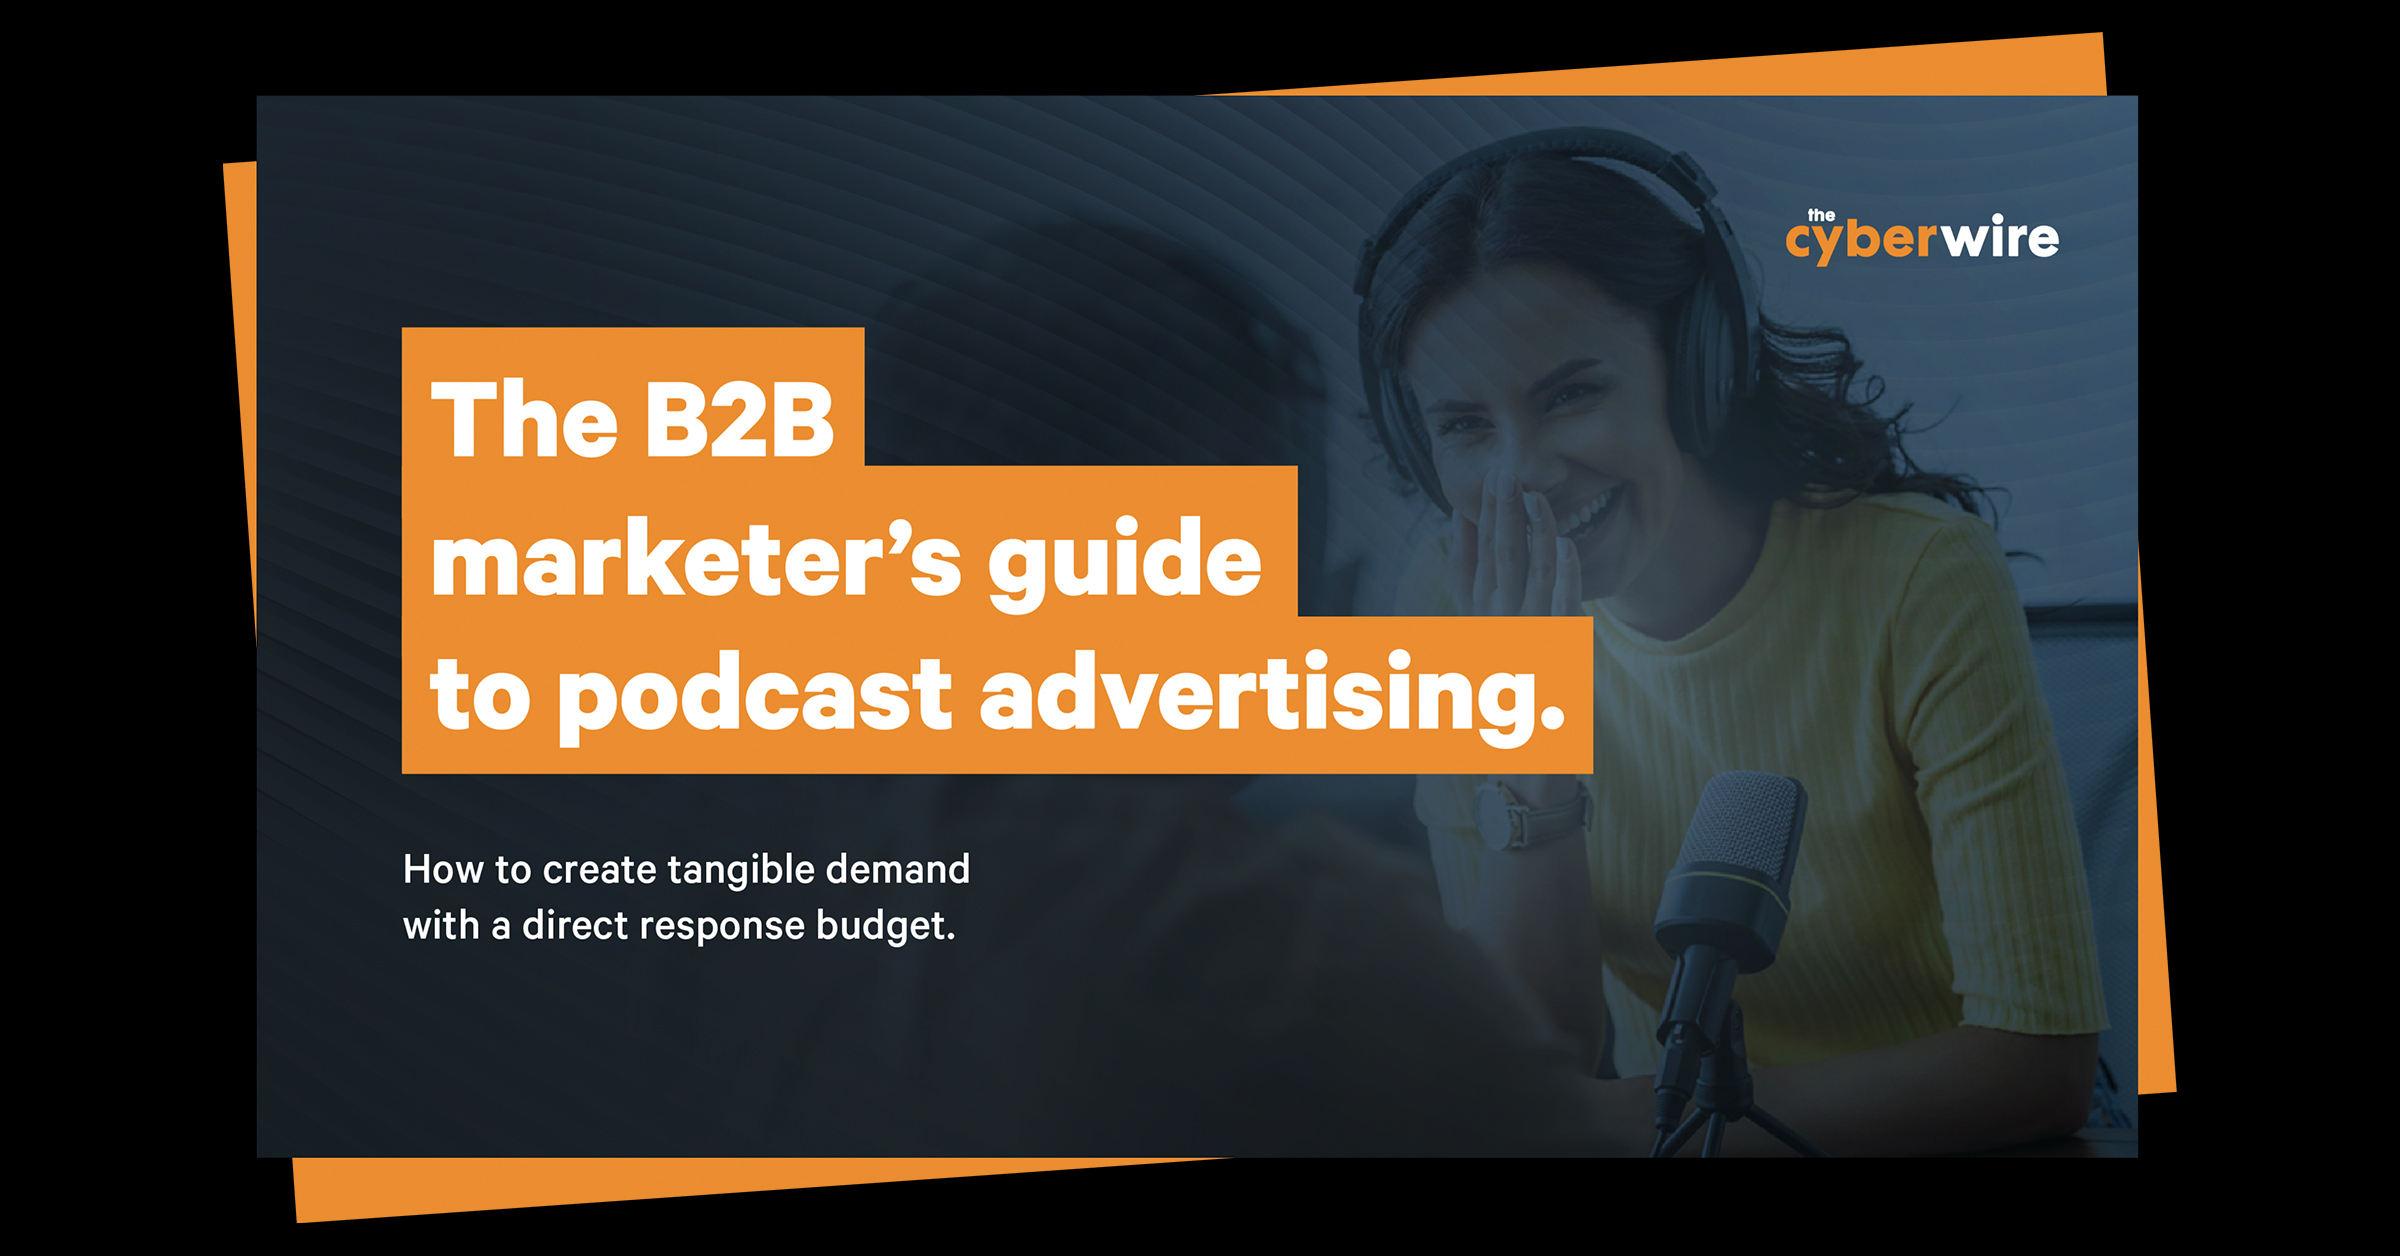 New guide helps B2B marketers take advantage of rapidly emerging opportunities in podcast advertising.